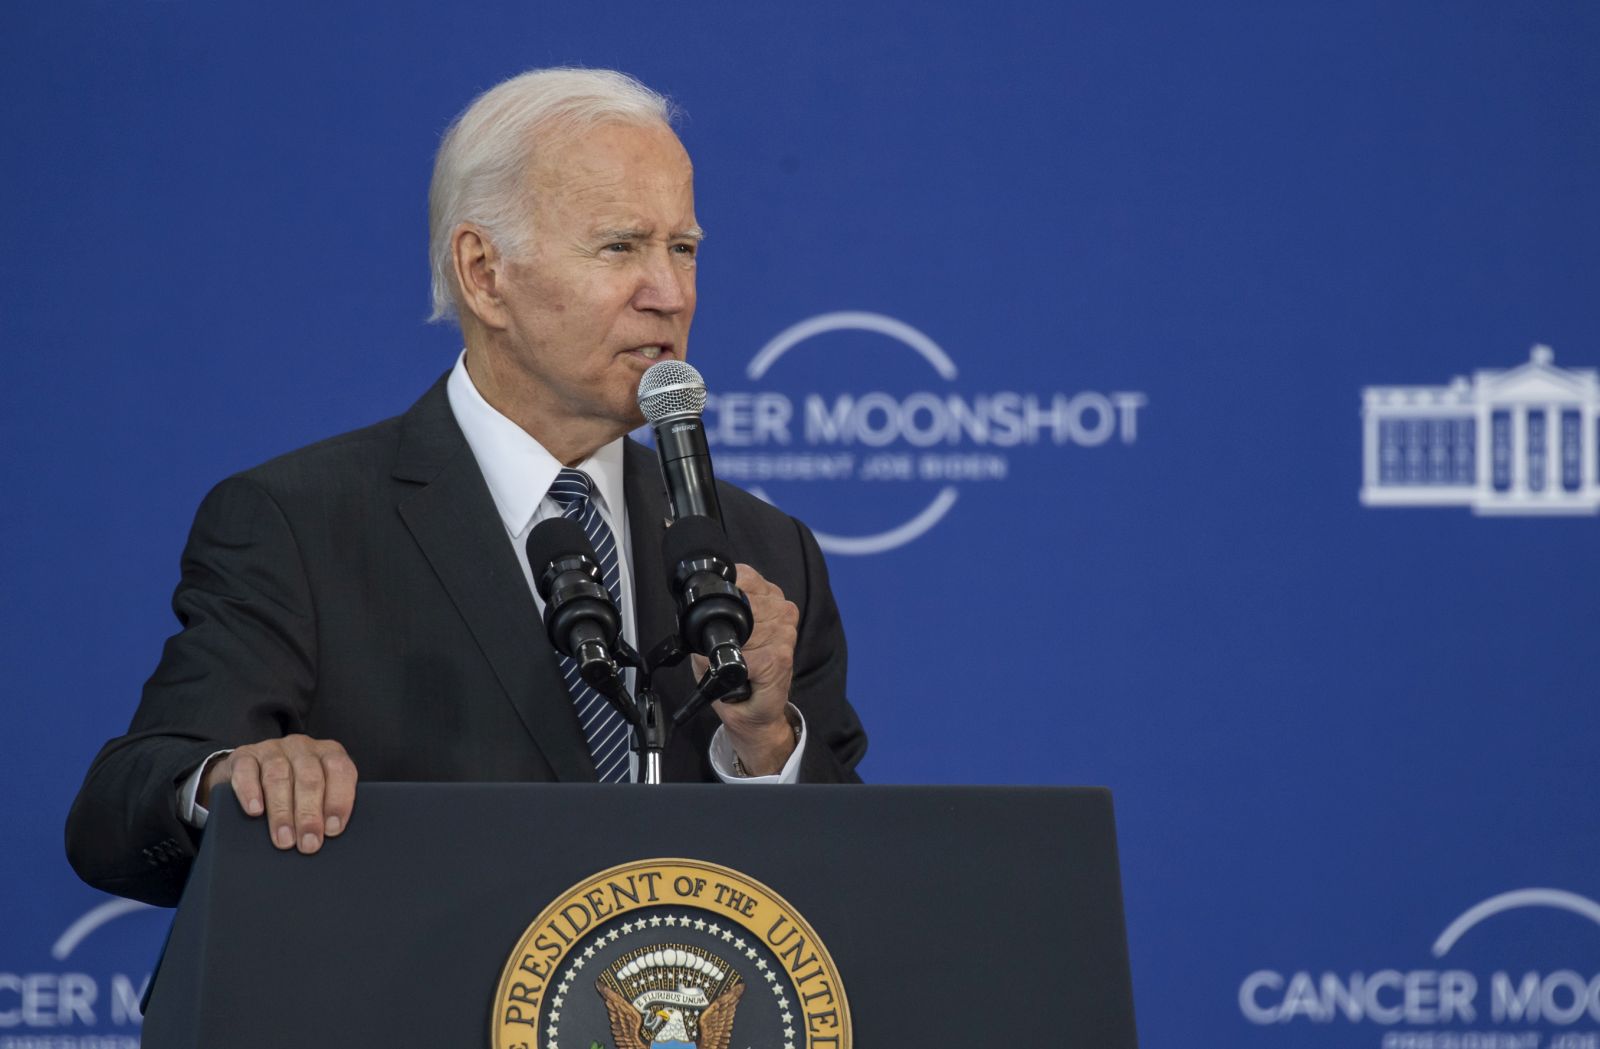 epa10180537 US President Joe Biden delivers remarks on the Cancer Moonshot, which aims to dramatically reduce cancer deaths, on the 60th anniversary of President John F. Kennedy's 'Moonshot' speech, at the JFK Library and Museum in Boston, Massachusetts, USA, 12 September 2022.  EPA/AMANDA SABGA